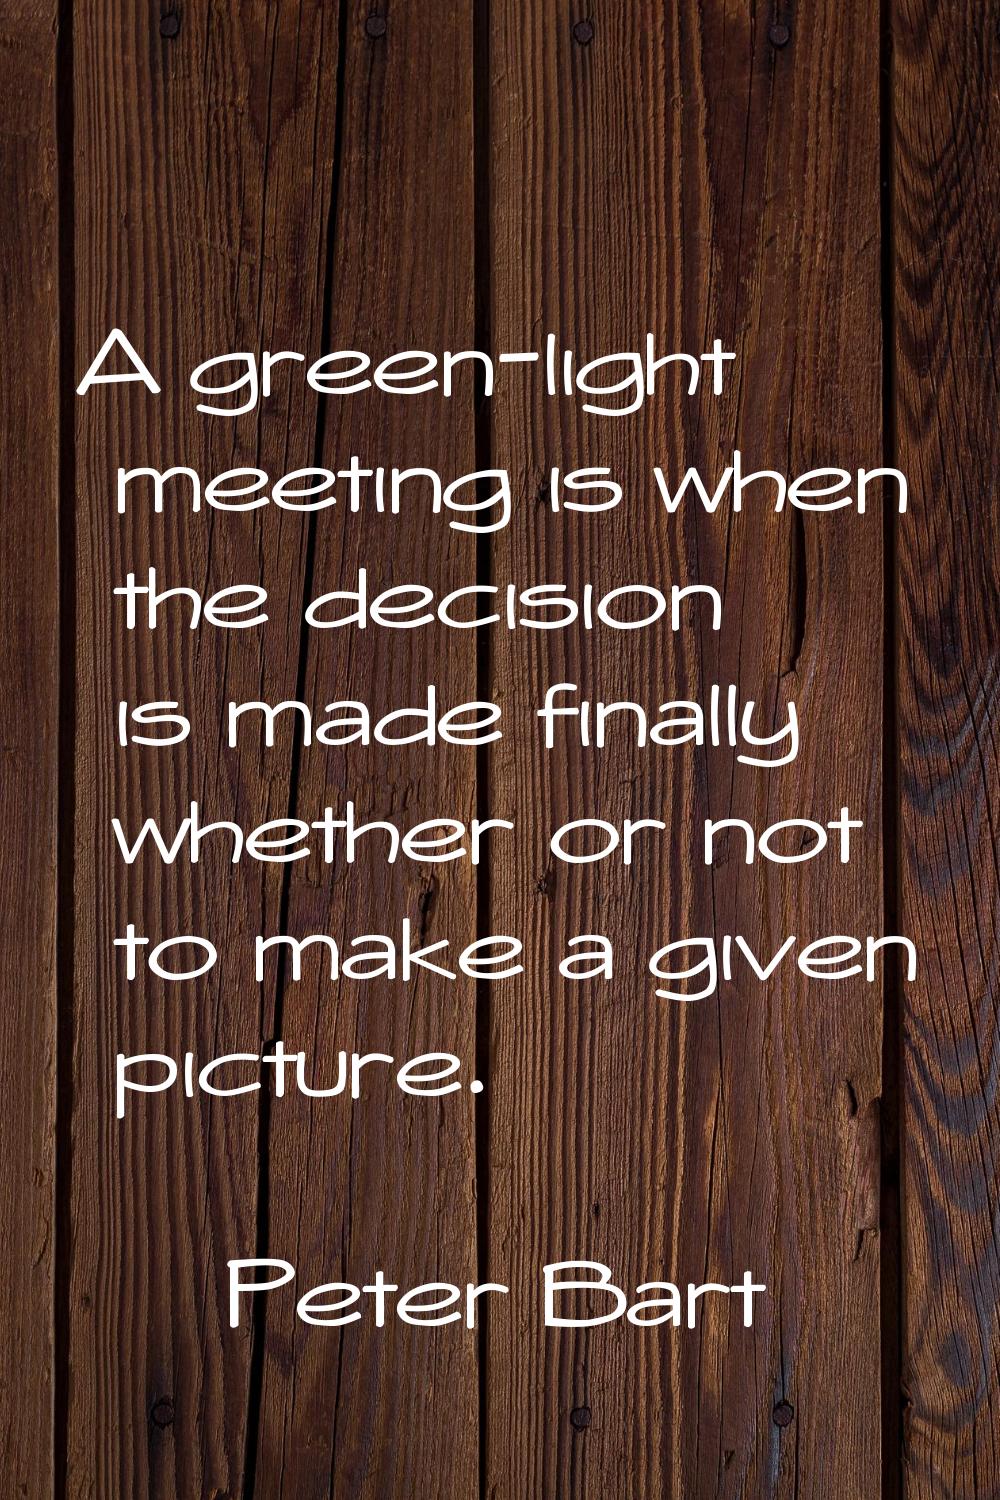 A green-light meeting is when the decision is made finally whether or not to make a given picture.